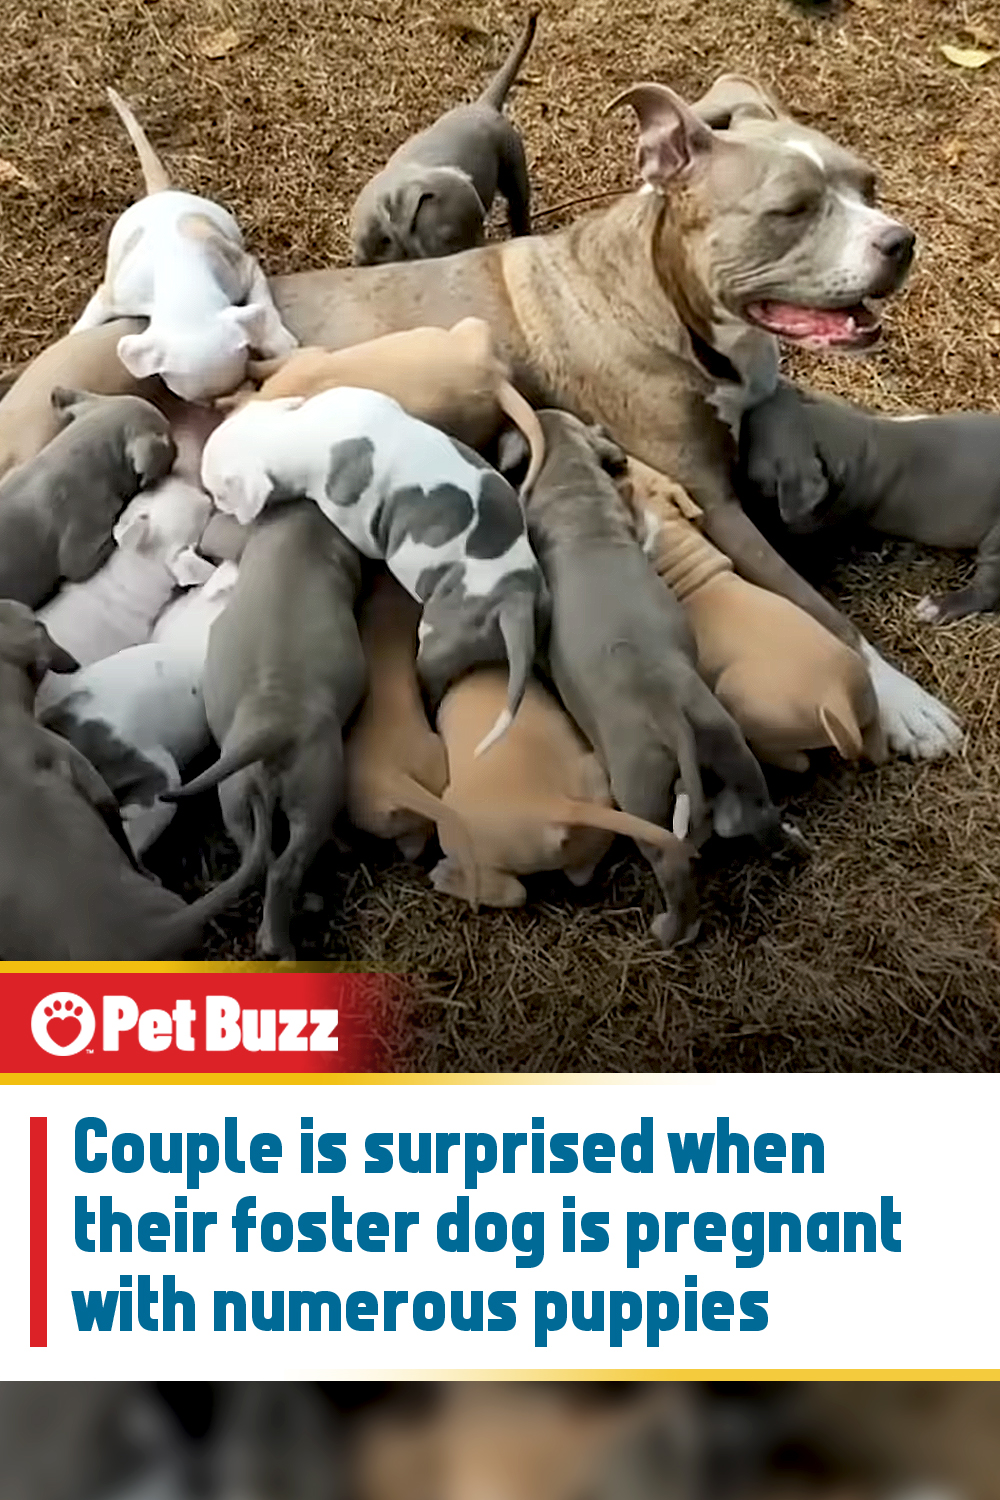 Couple is surprised when their foster dog is pregnant with numerous puppies